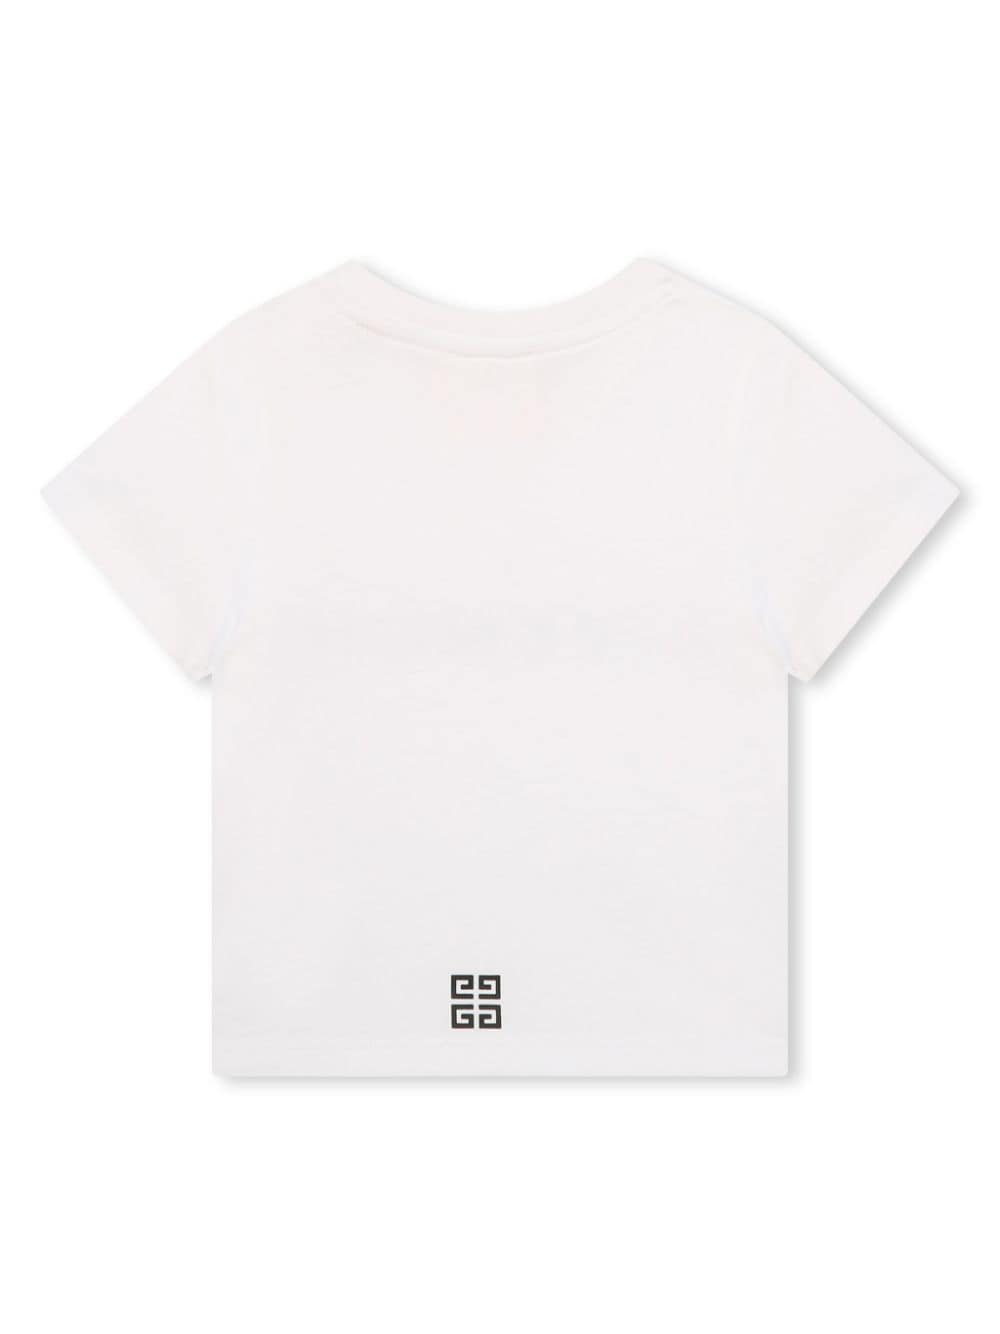 White baby t-shirt with logo